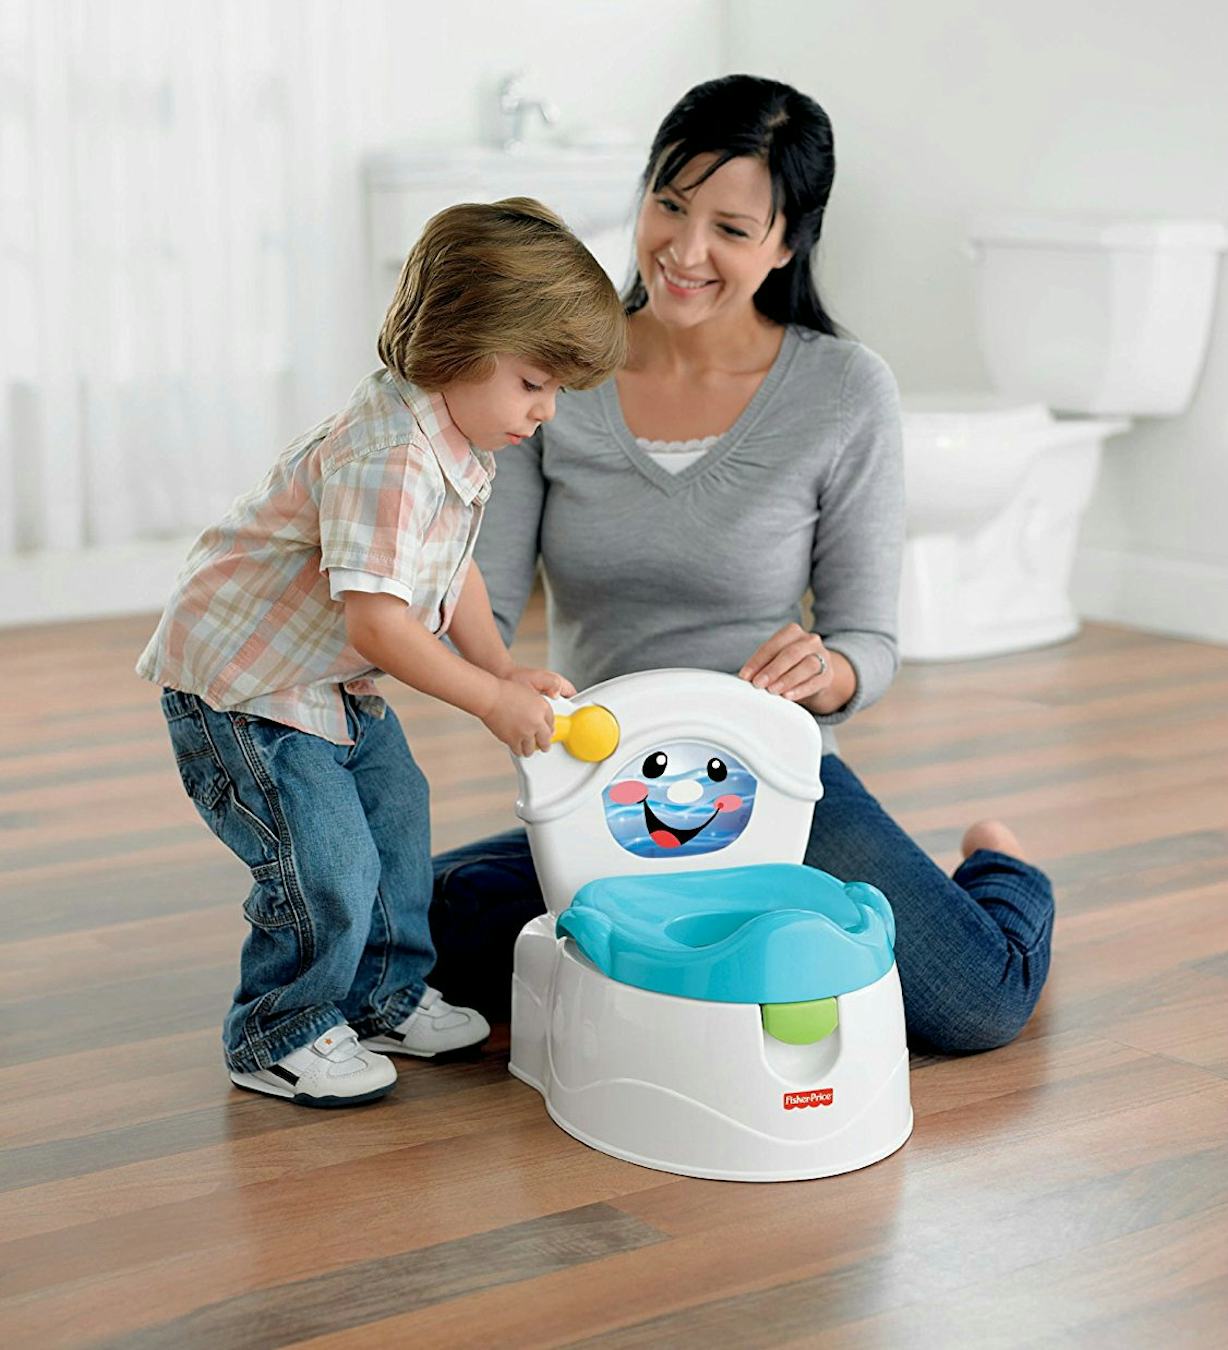 12 Brilliant Potty Training Tools And Toilets That Make The Process Way